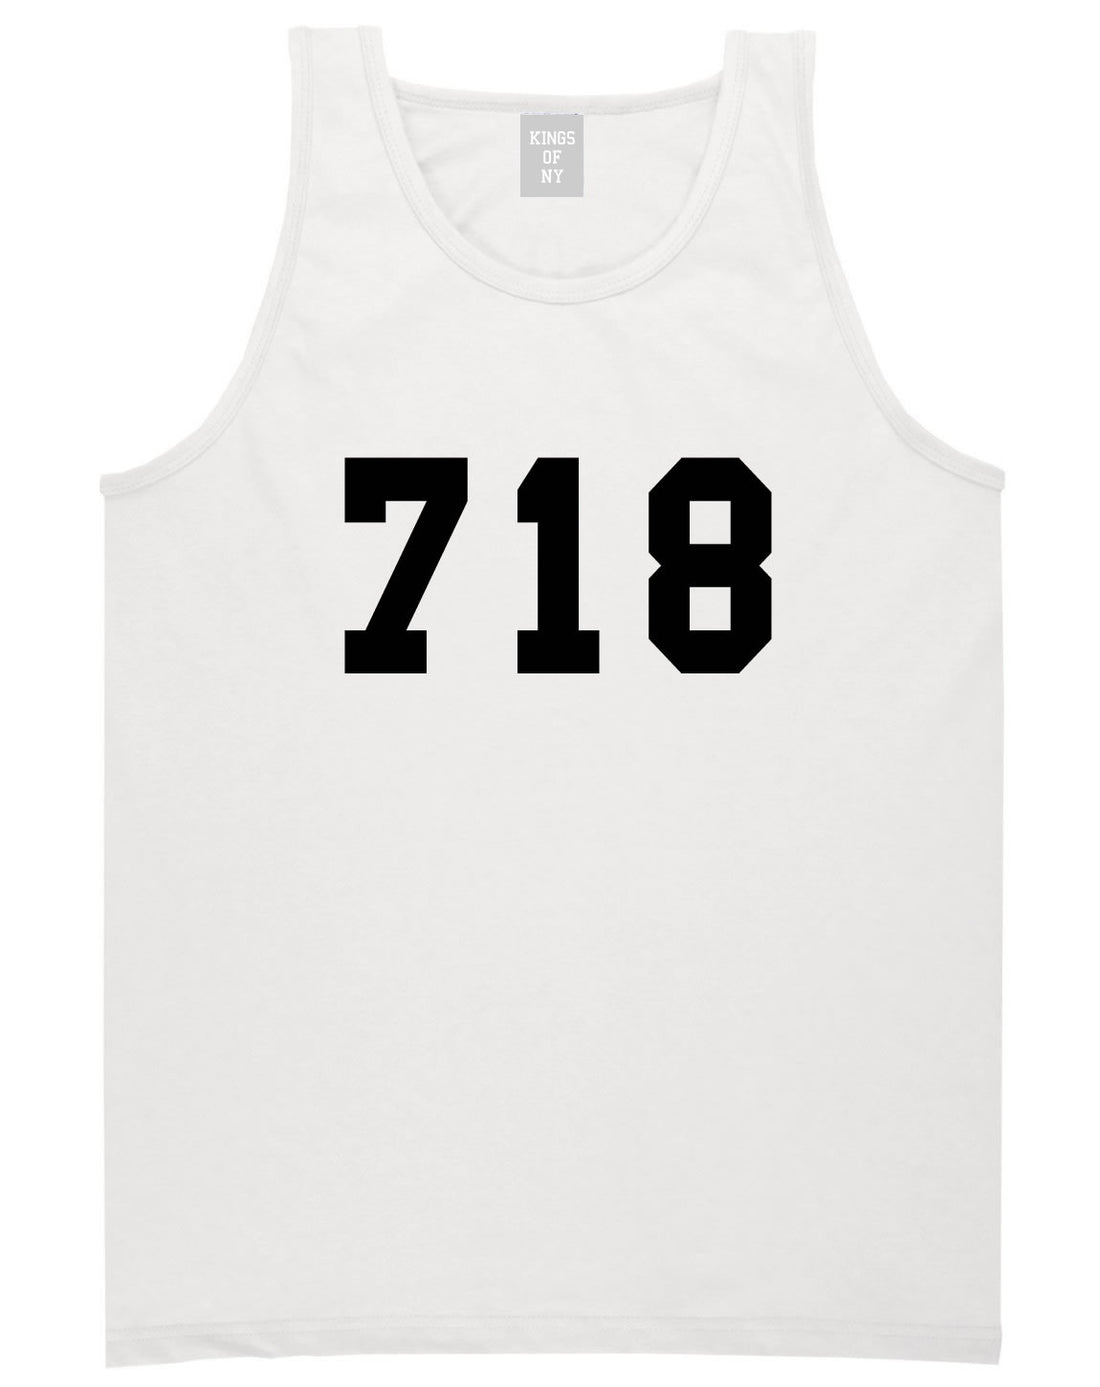 718 New York Area Code Tank Top in White By Kings Of NY